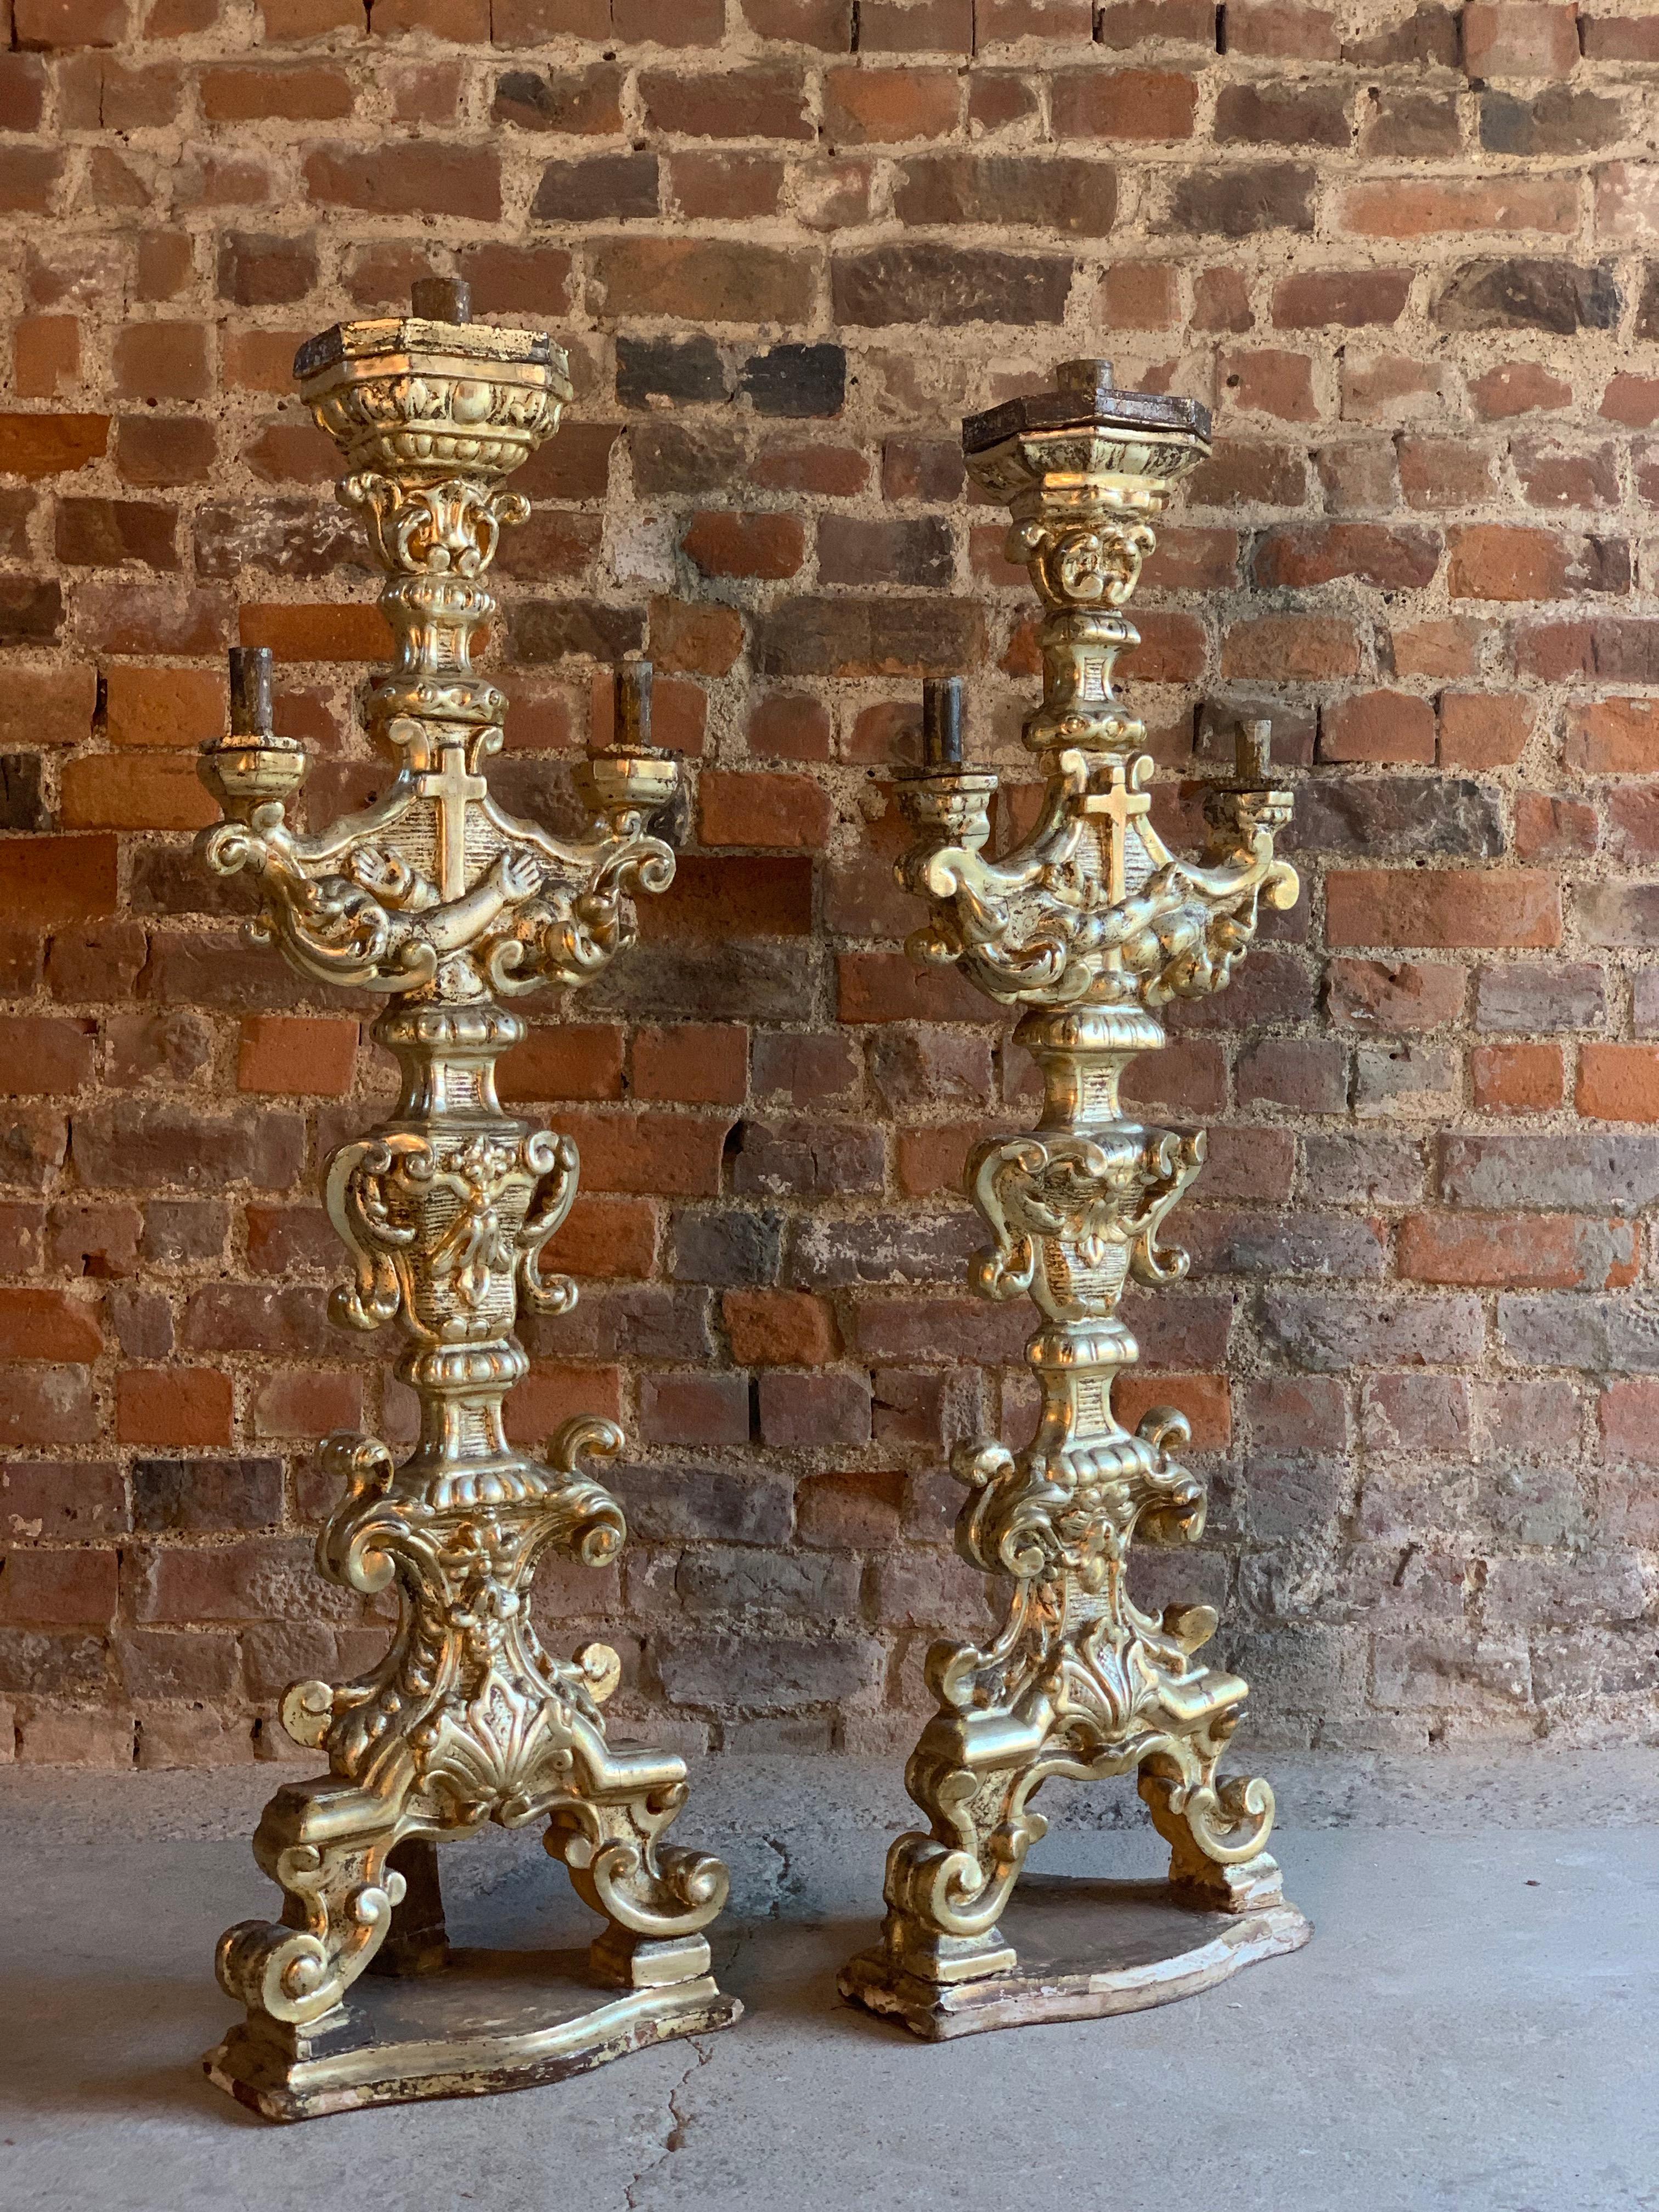 Antique 18th century carved Baroque candlesticks silvered Gesso and giltwood circa 1750.

A magnificent large pair of 18th century carved wooden Baroque church altar candlesticks circa 1750, the wooden candlesticks gesso and gilding with the